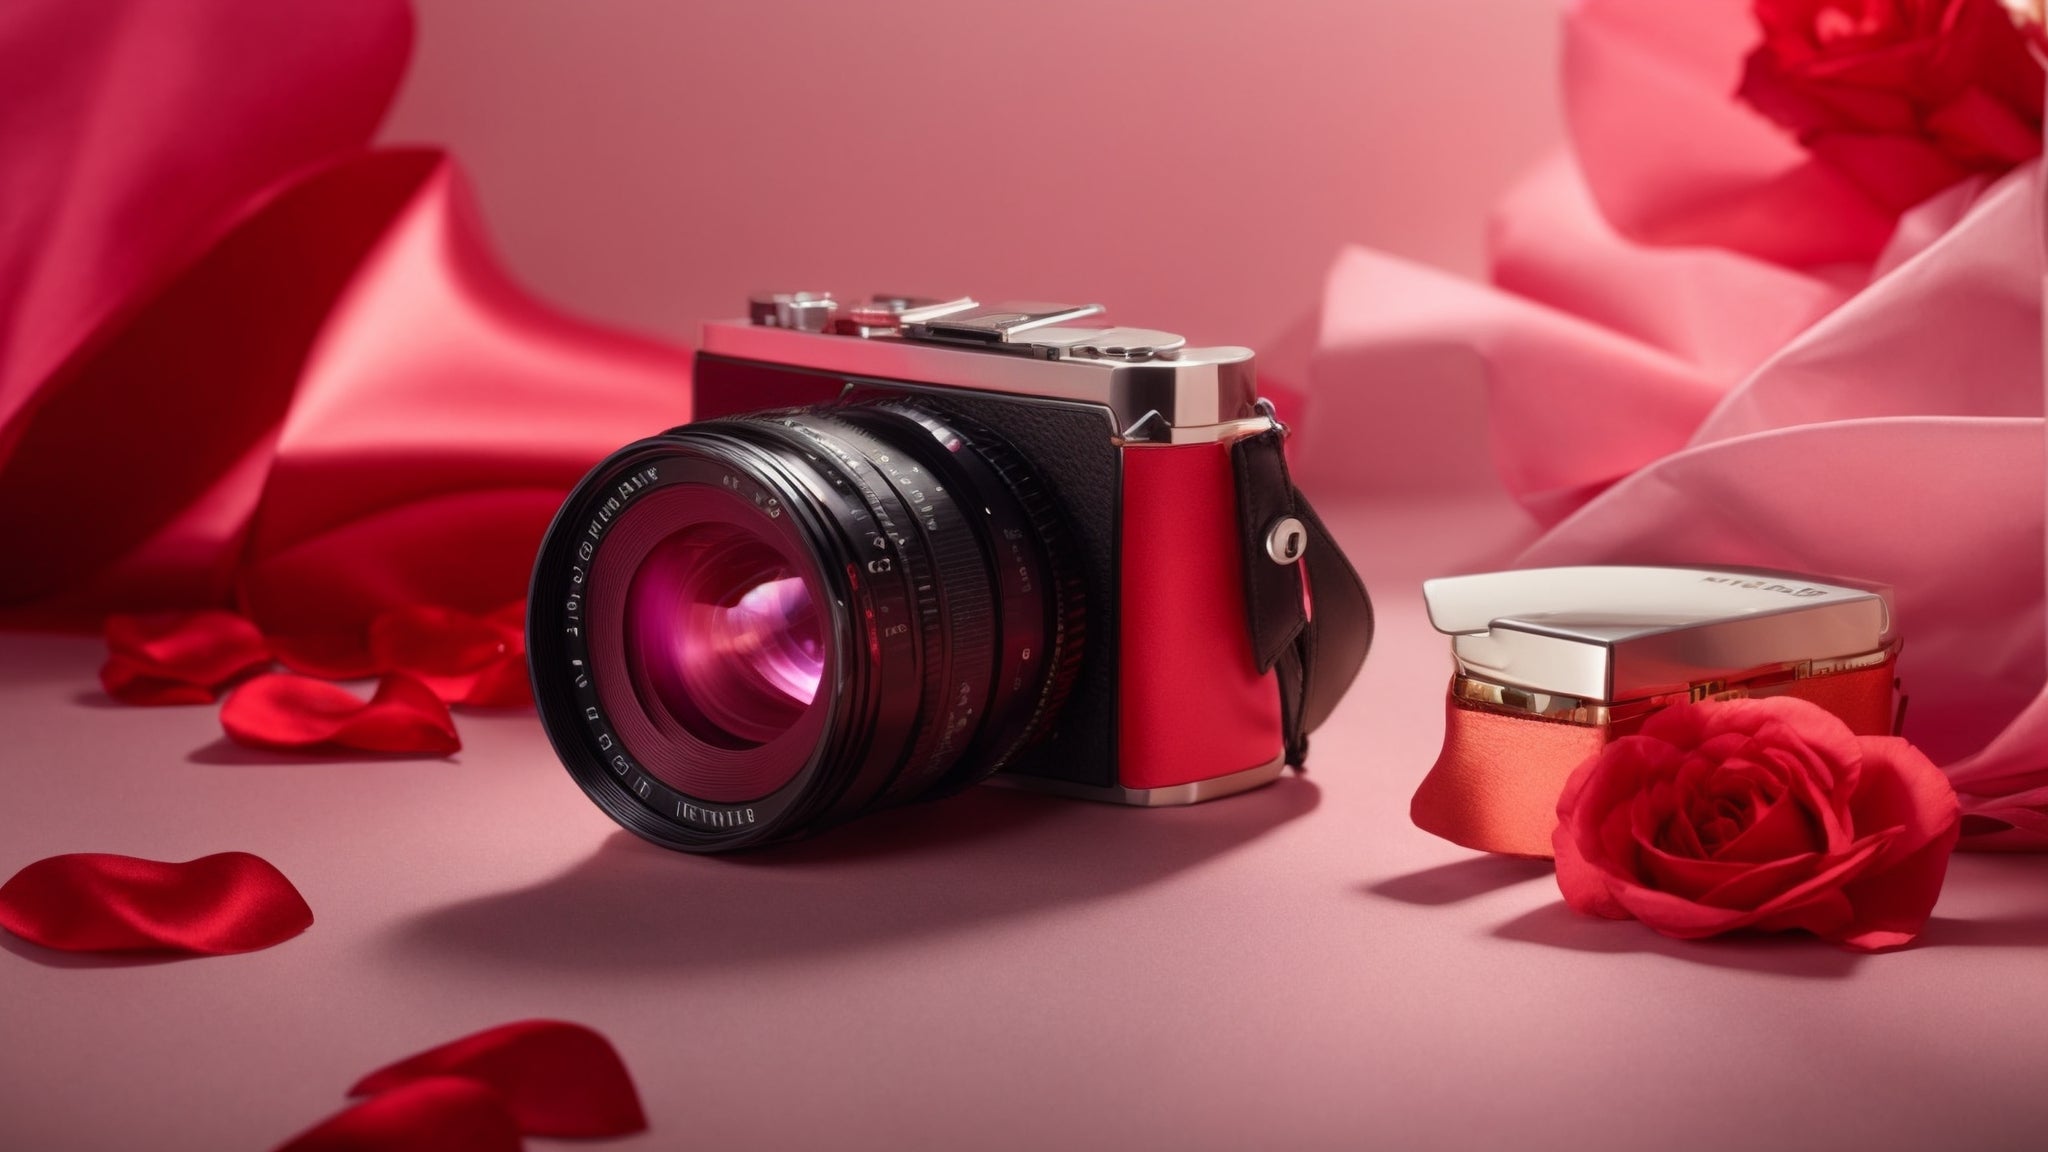 One-of-a-Kind Valentine’s Day Gifts for Him and Her